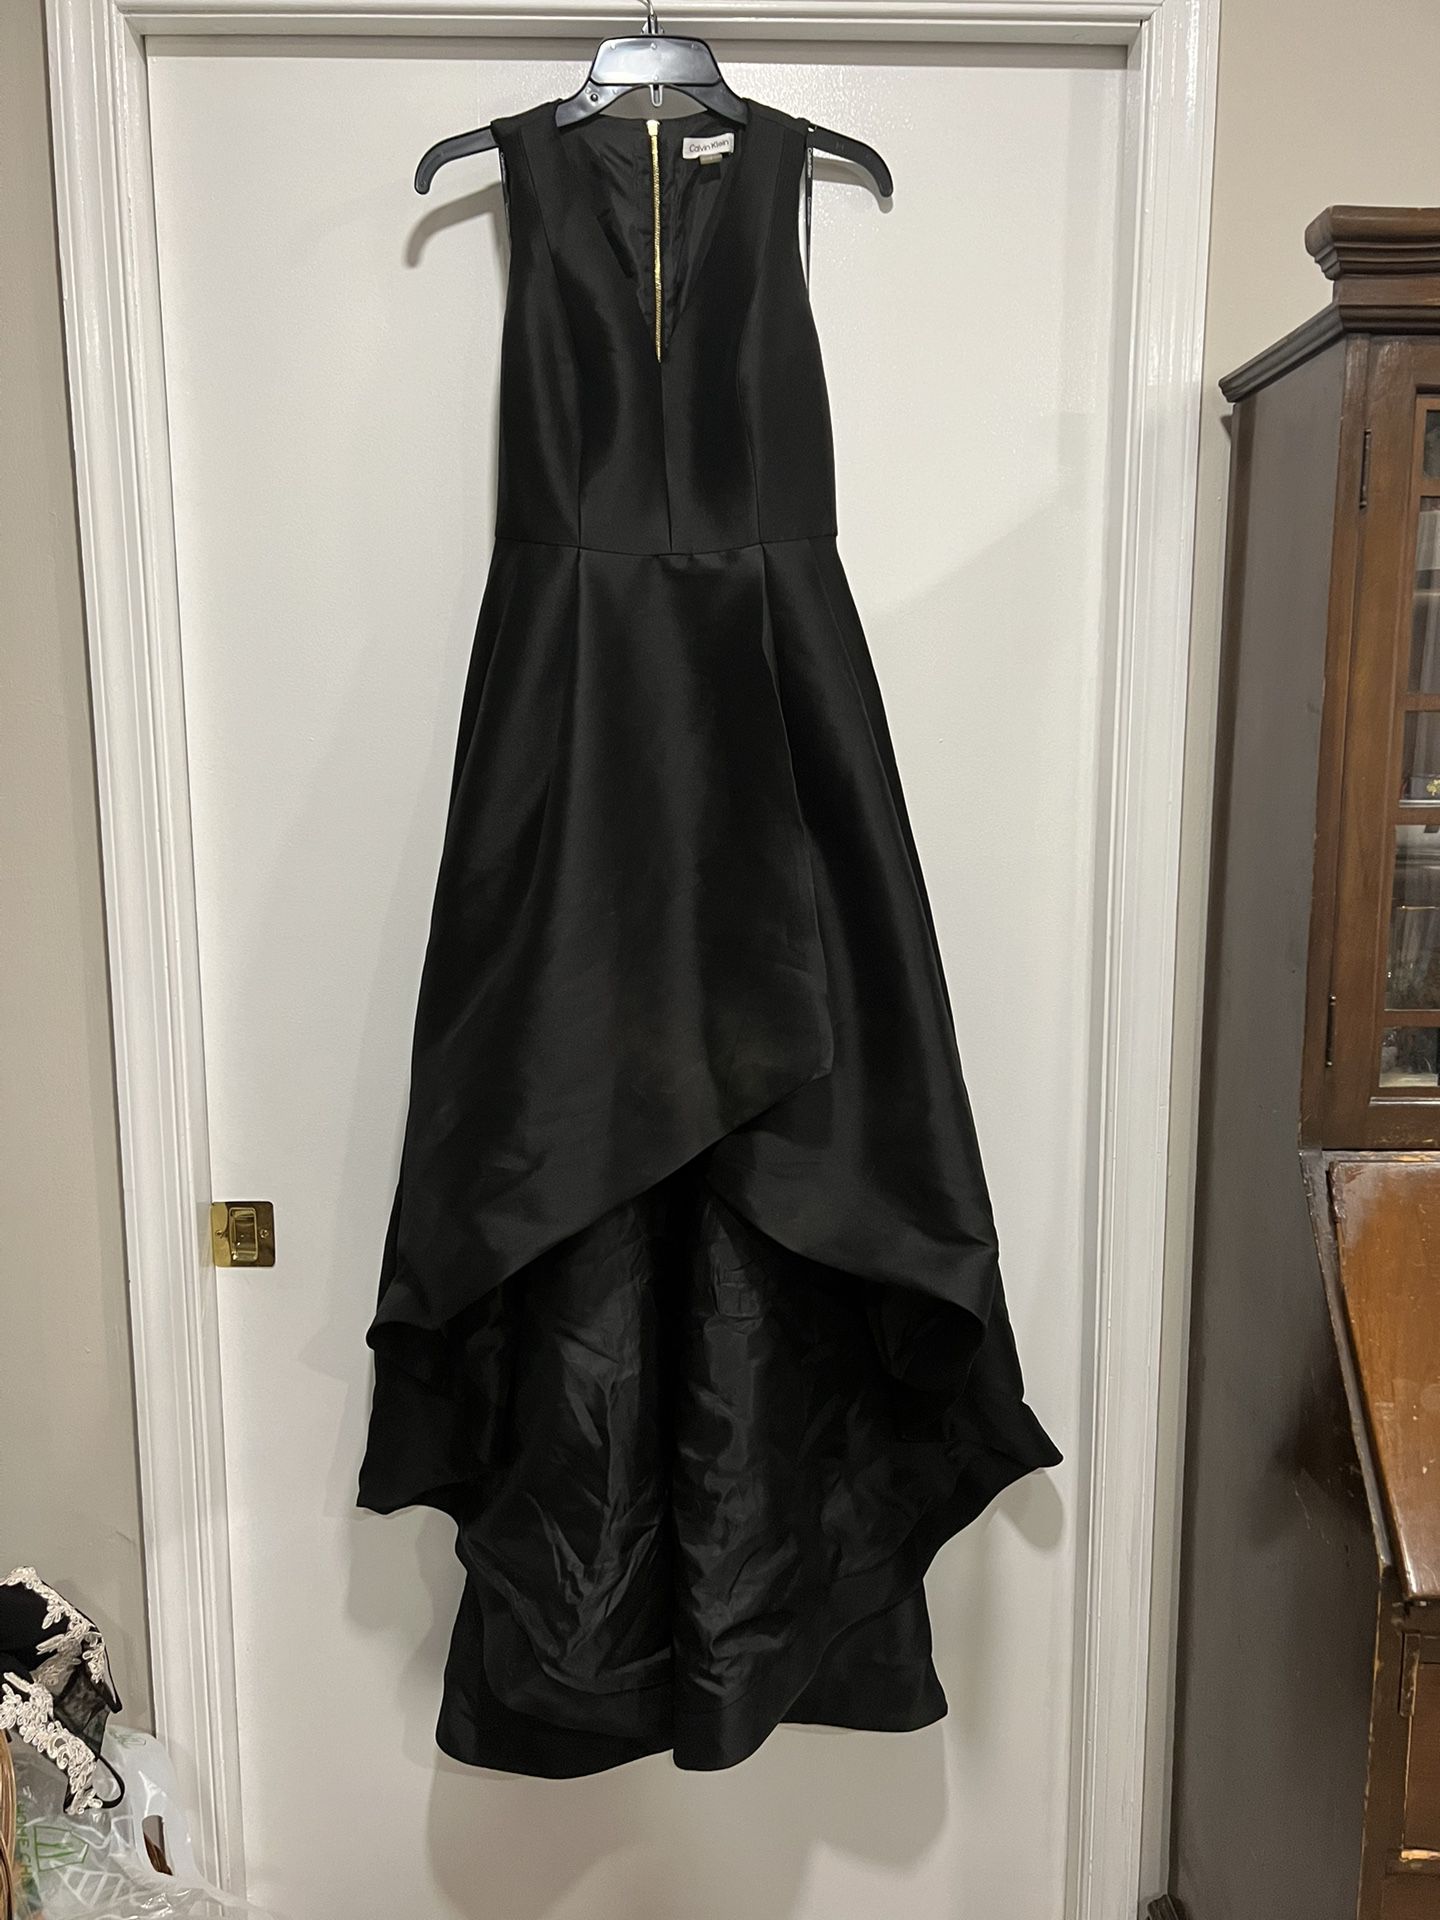 Calvin Klein Black Ball Gown With High Low Hem